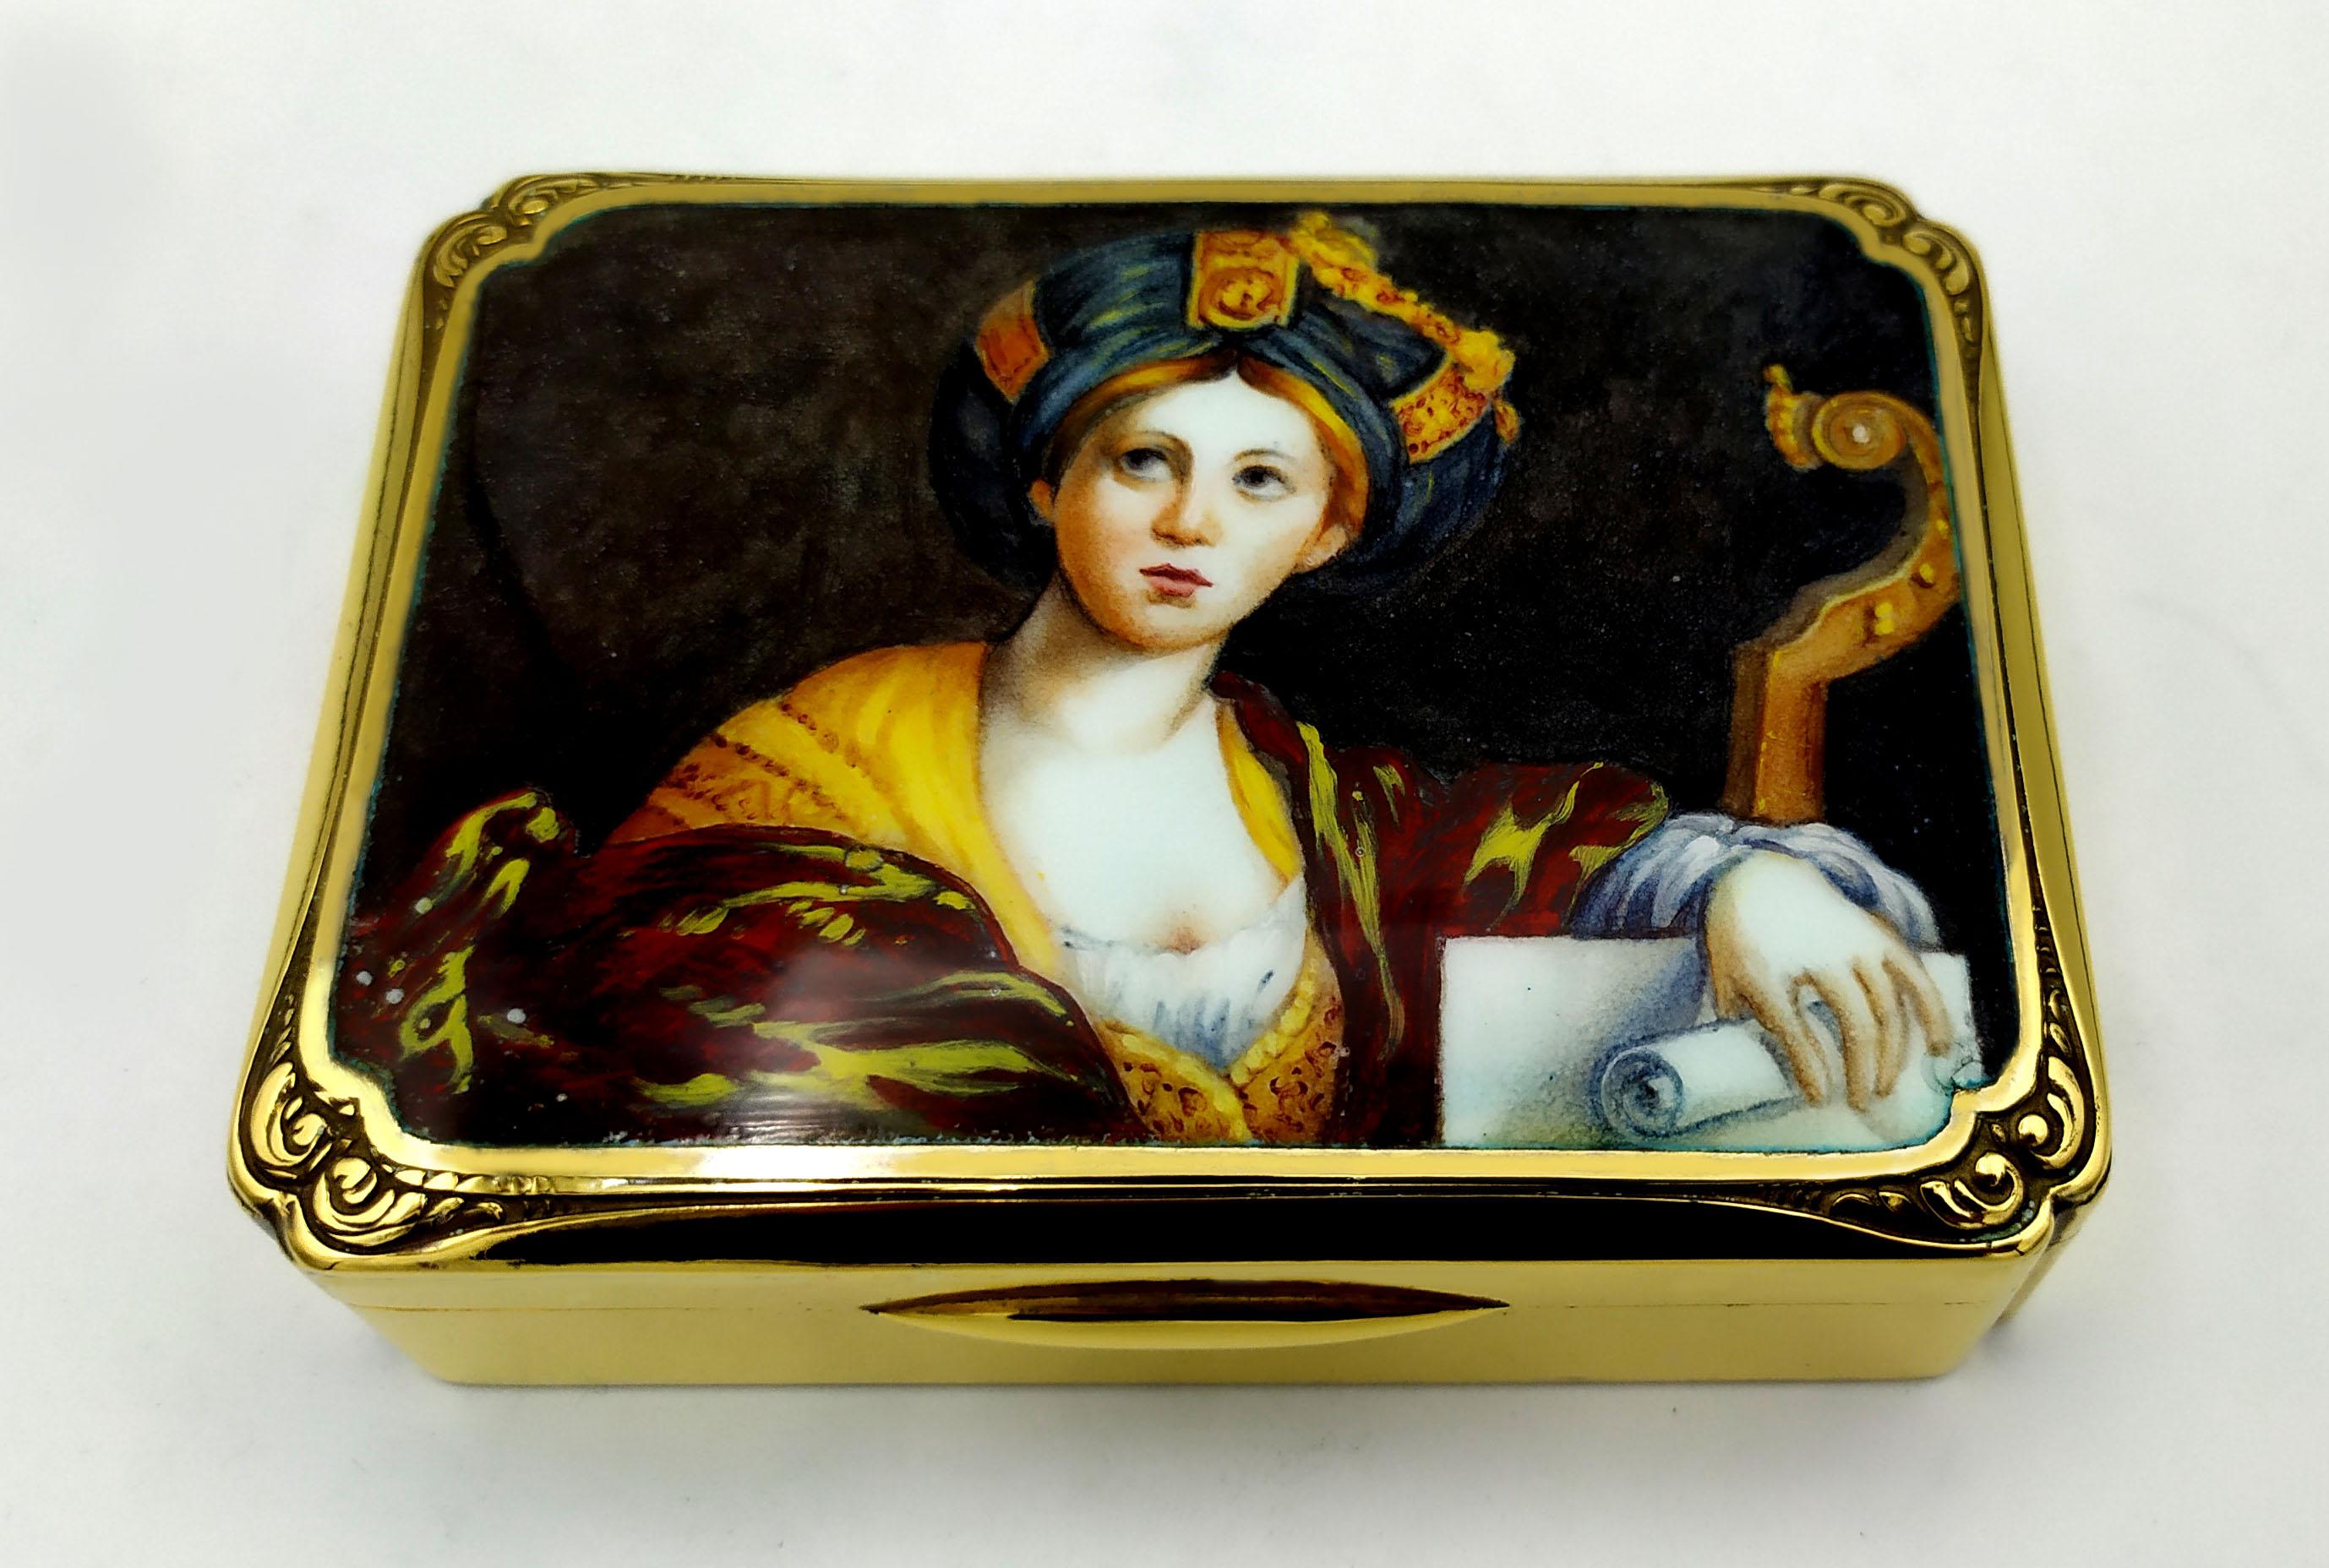 Rectangular box with inward corners in sterling silver 925/1000 gold plated with beautiful miniature fire enameled and hand painted by the painter Beatrice Mellana depicting the painting 